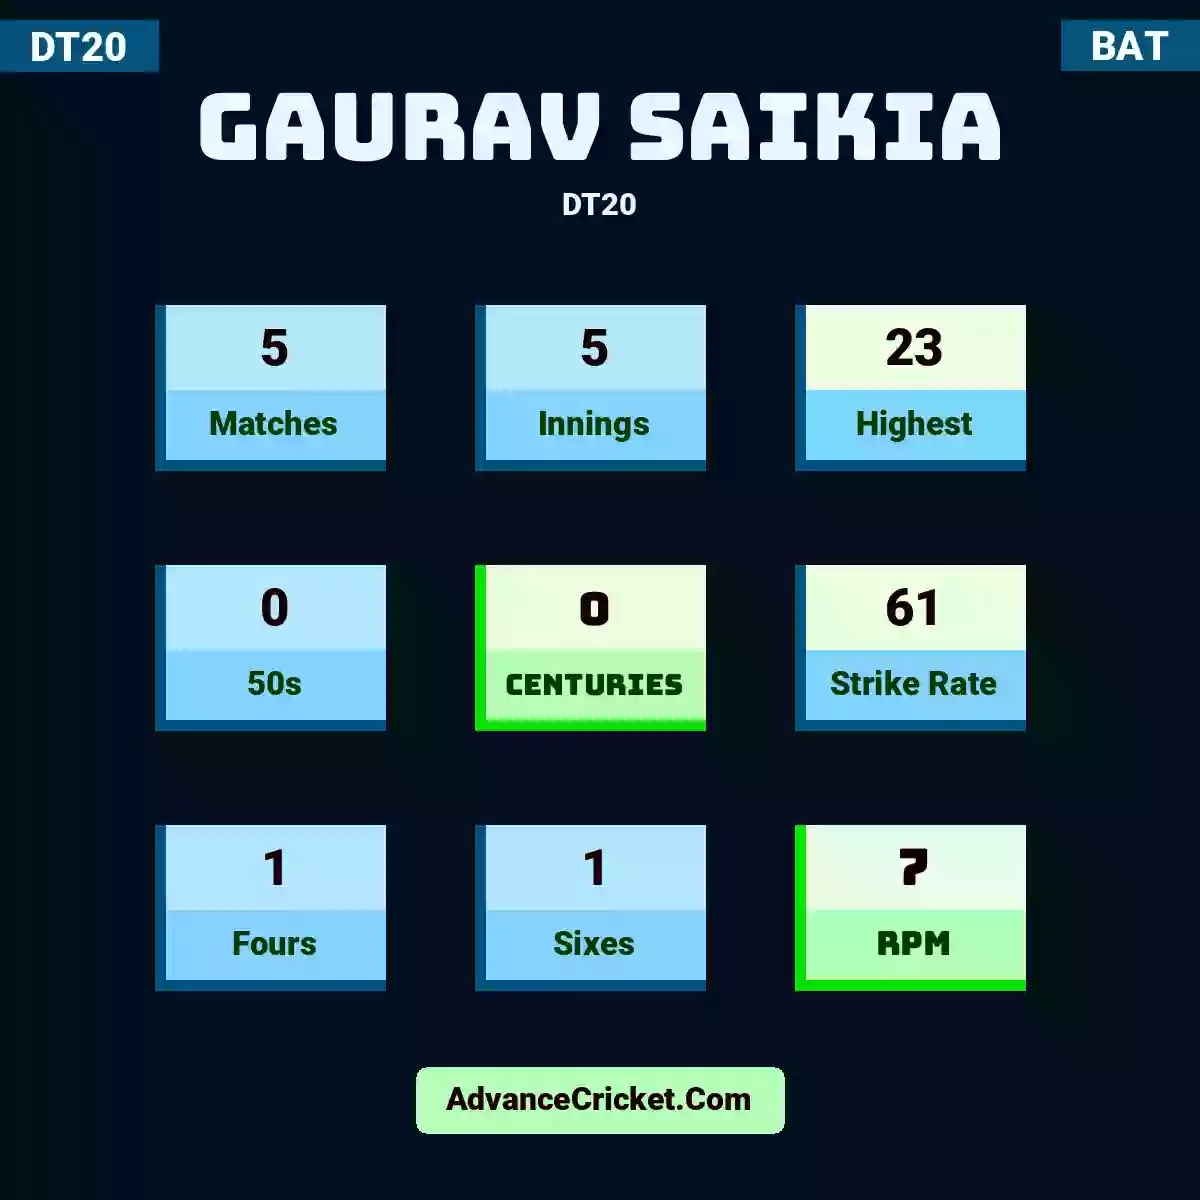 Gaurav Saikia DT20 , Gaurav Saikia played 5 matches, scored 23 runs as highest, 0 half-centuries, and 0 centuries, with a strike rate of 61. g.saikia hit 1 fours and 1 sixes, with an RPM of 7.